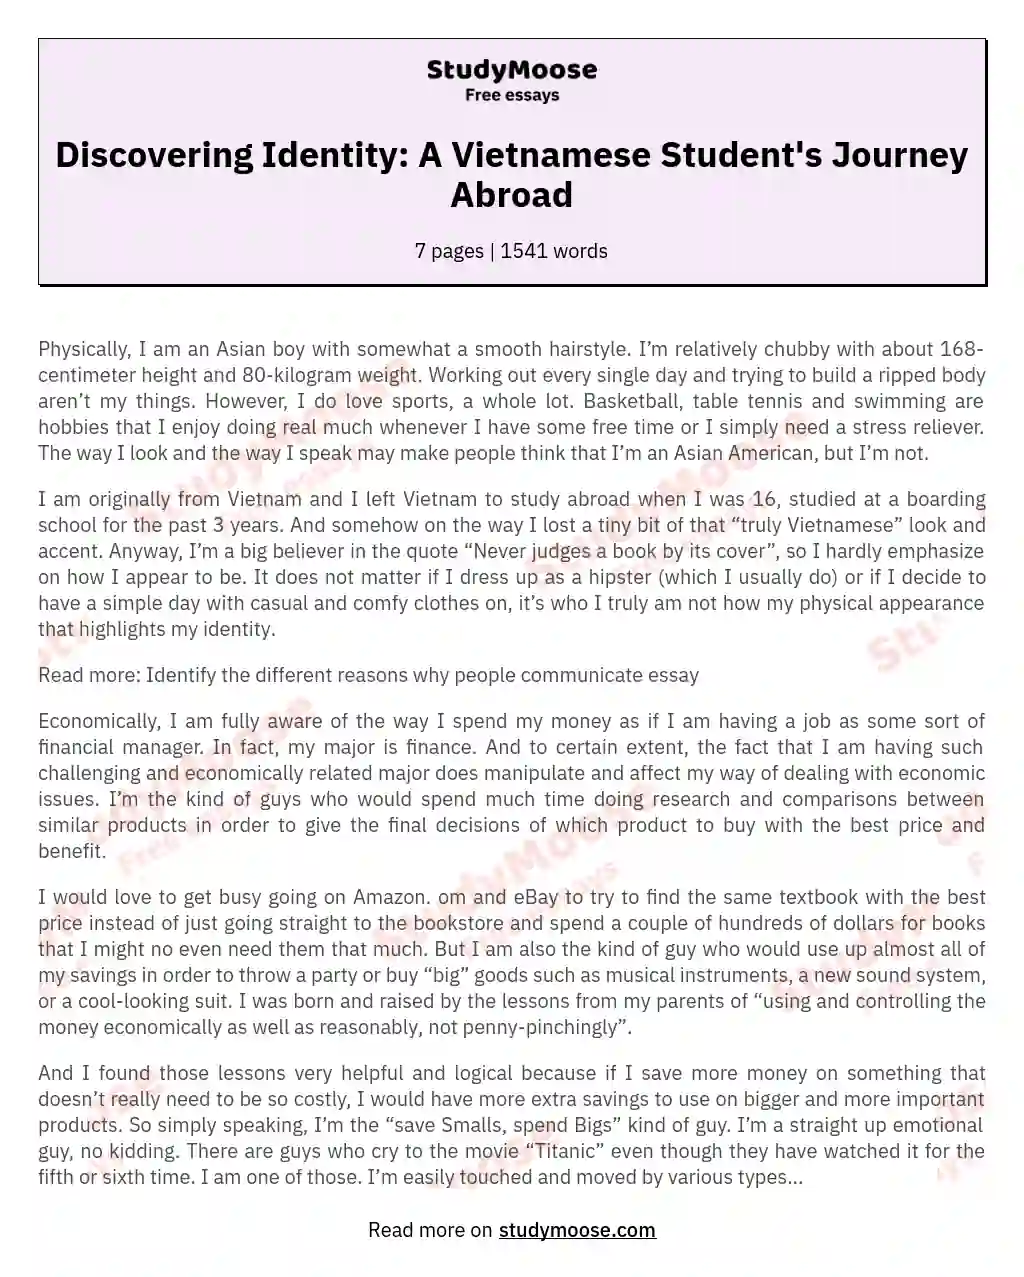 Discovering Identity: A Vietnamese Student's Journey Abroad essay